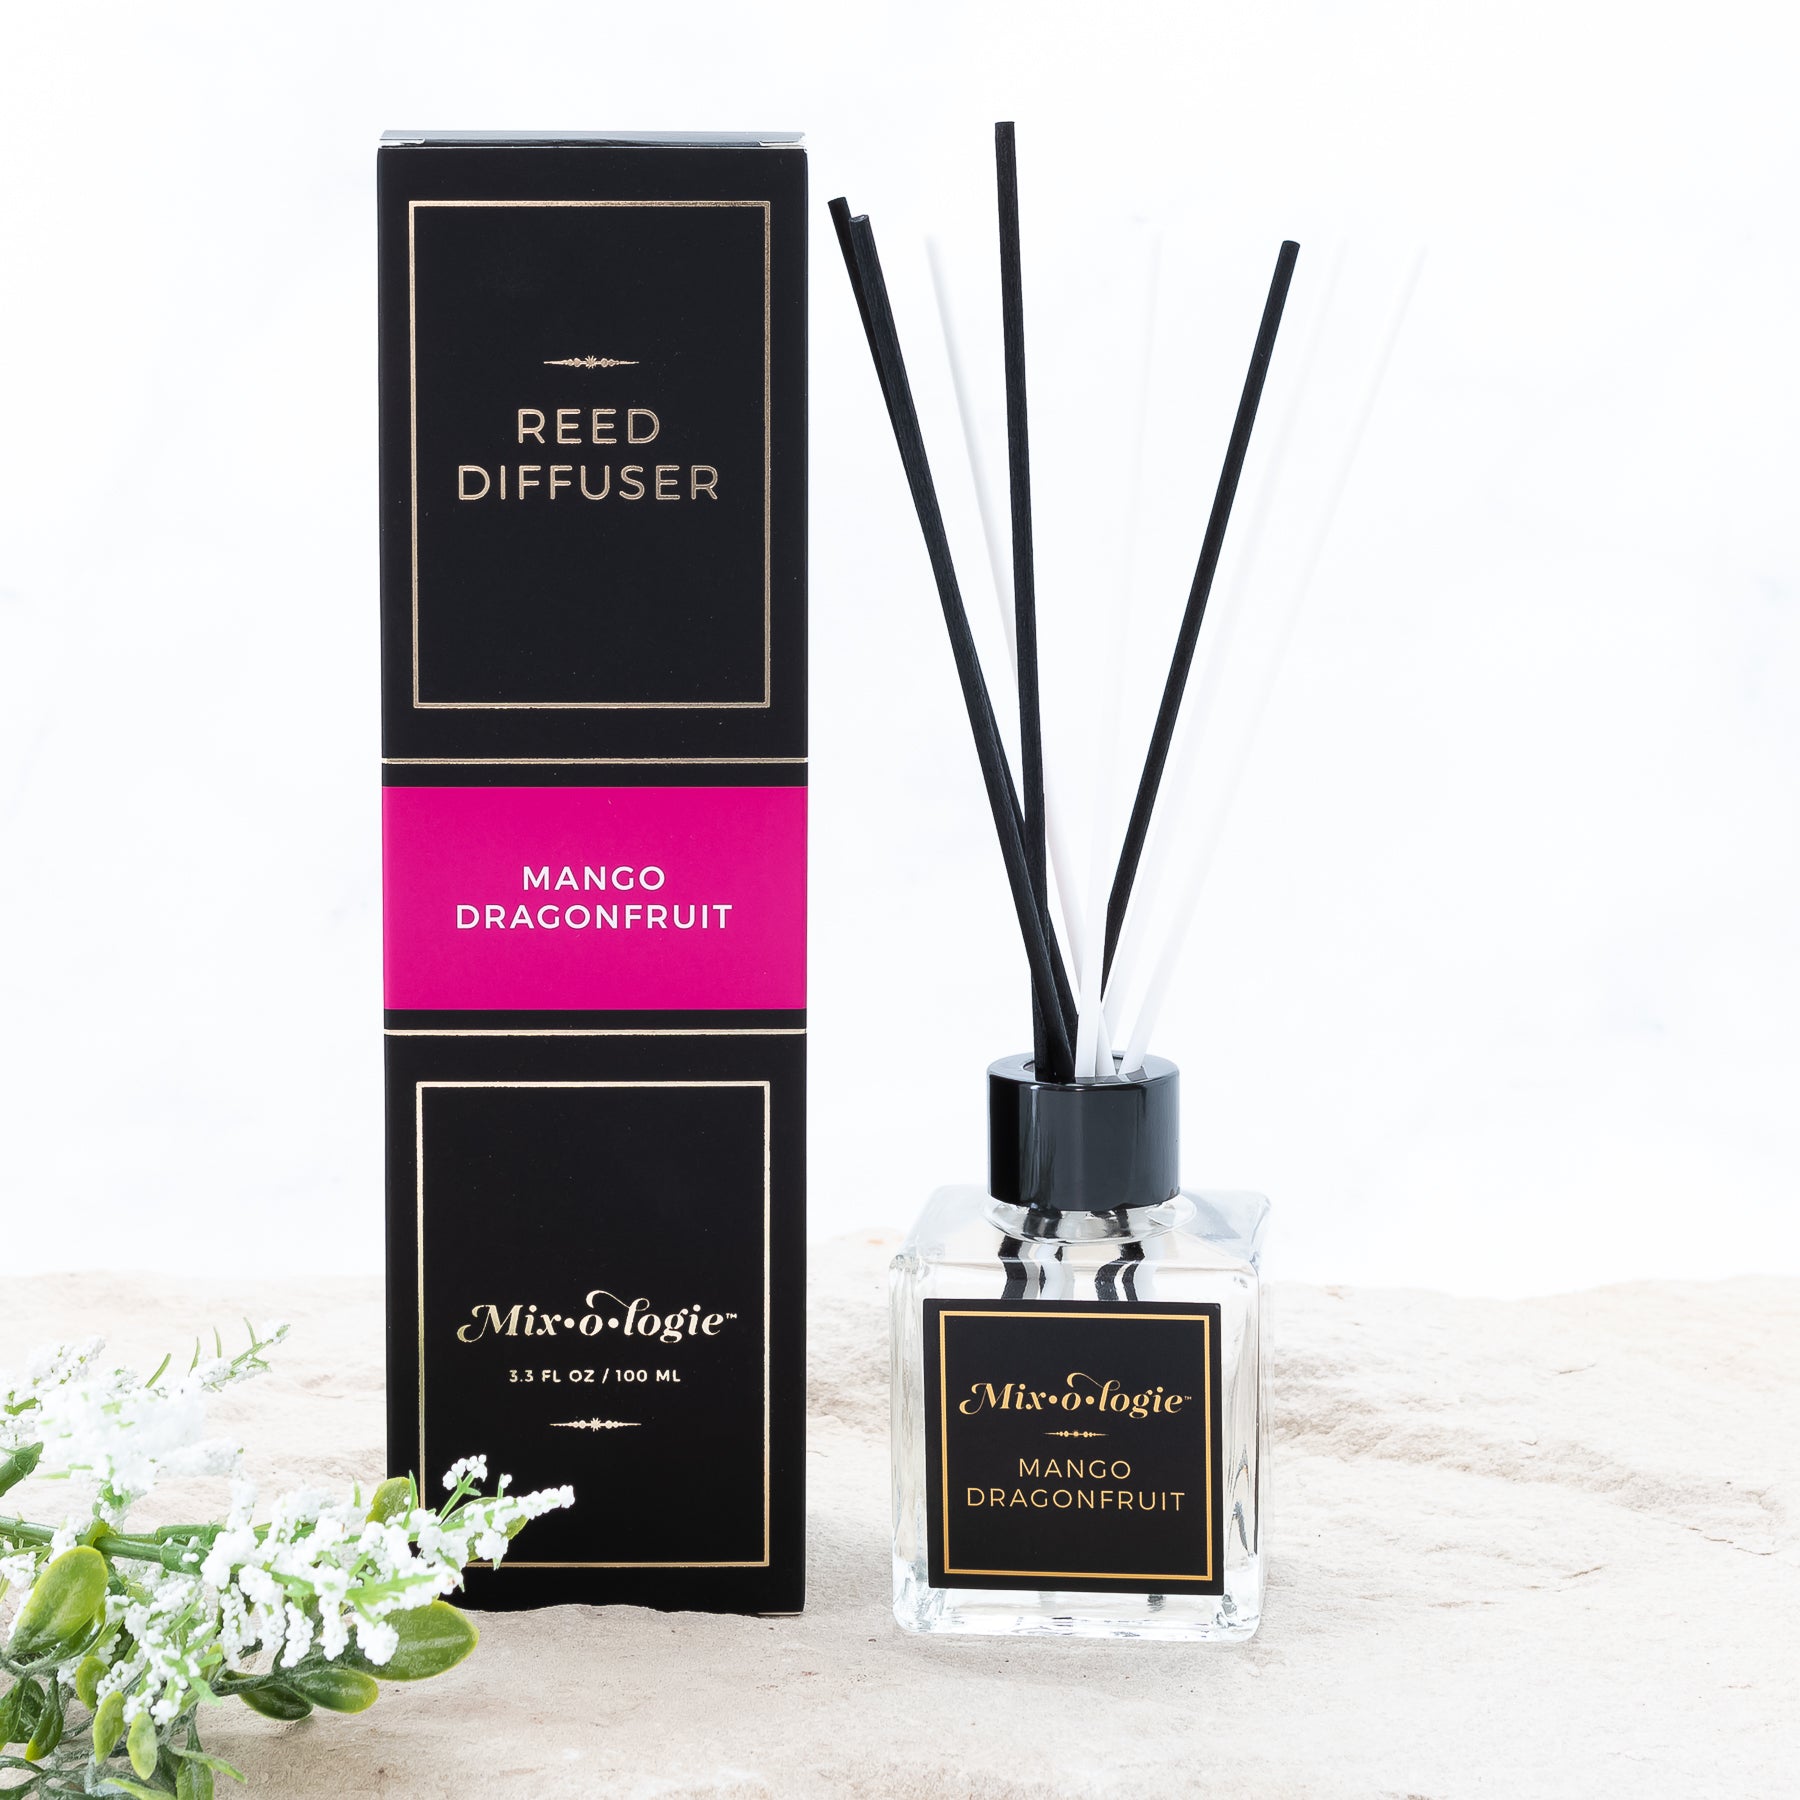 Mango Dragonfruit Reed Diffuser is a clear square glass container with black label that says Mixologie – Mango Dragonfruit. Has a black top and 4 white & 4 black reed sticks coming out of top, is 3.3 fl oz or 100 mL of clear scented liquid. Black rectangle package box with bright pink label. Box and diffuser are pictured in sand with greenery with white flowers.